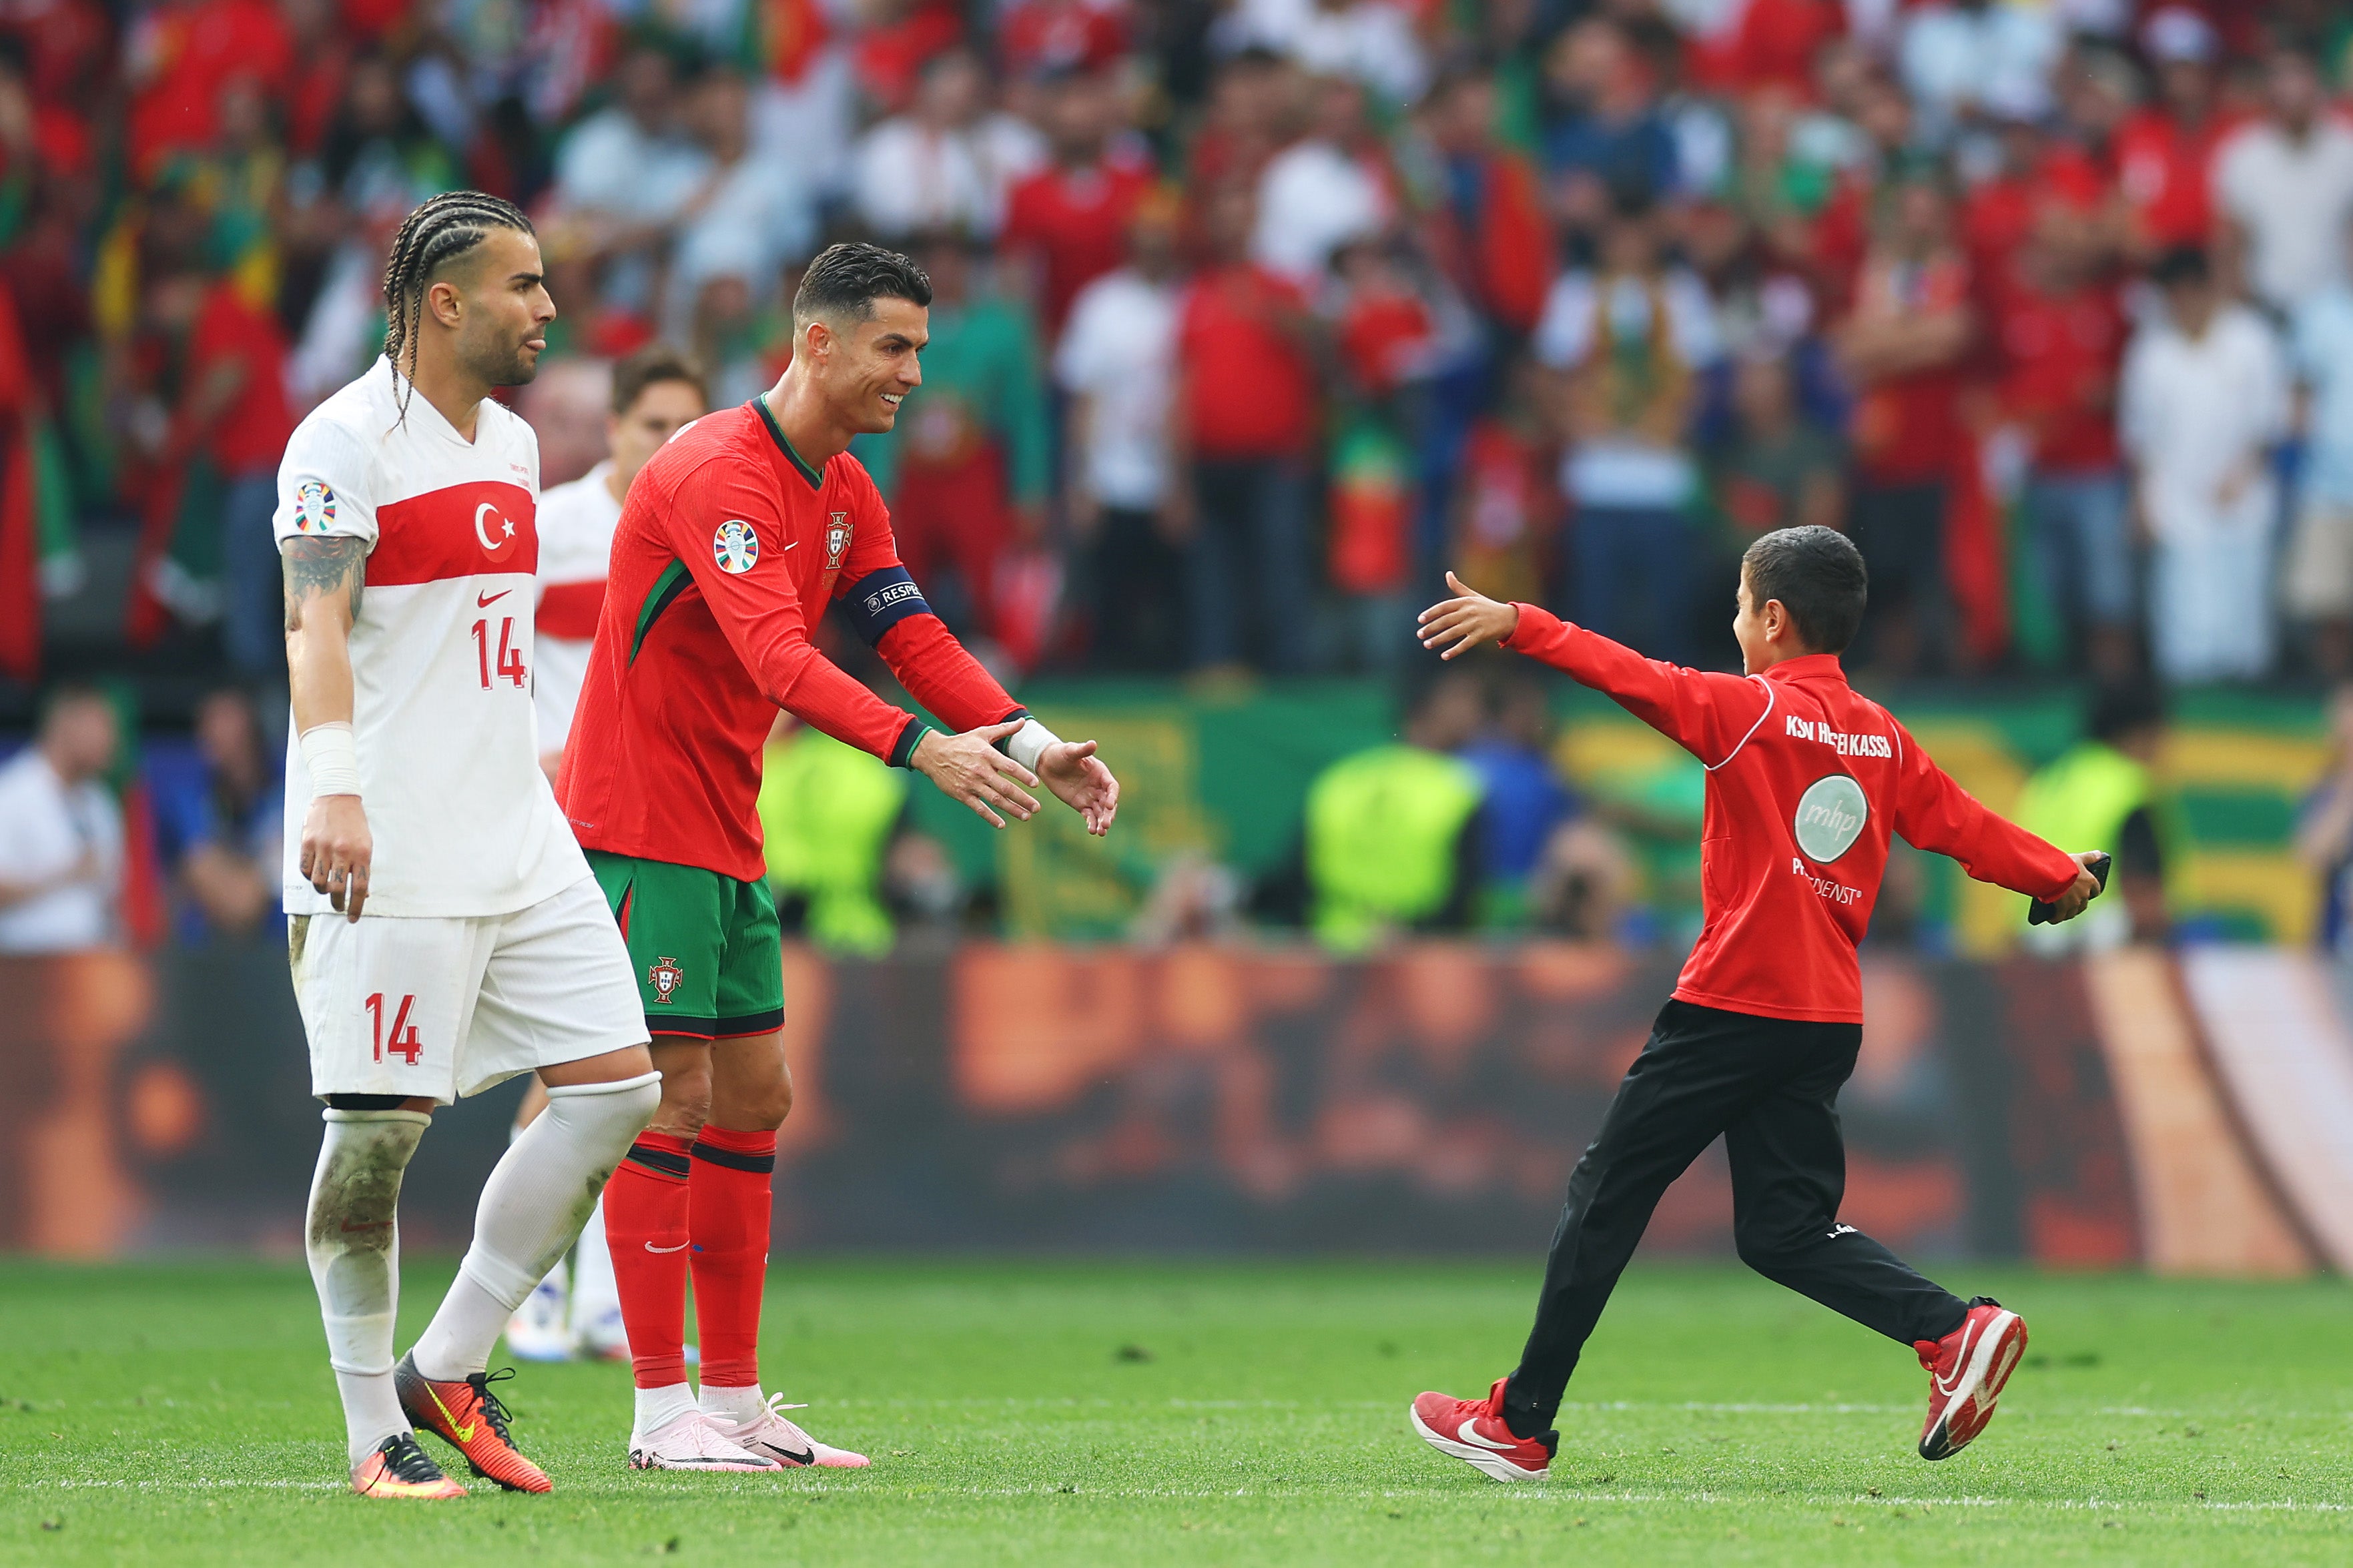 Cristiano Ronaldo reaches out to hug a young pitch invader